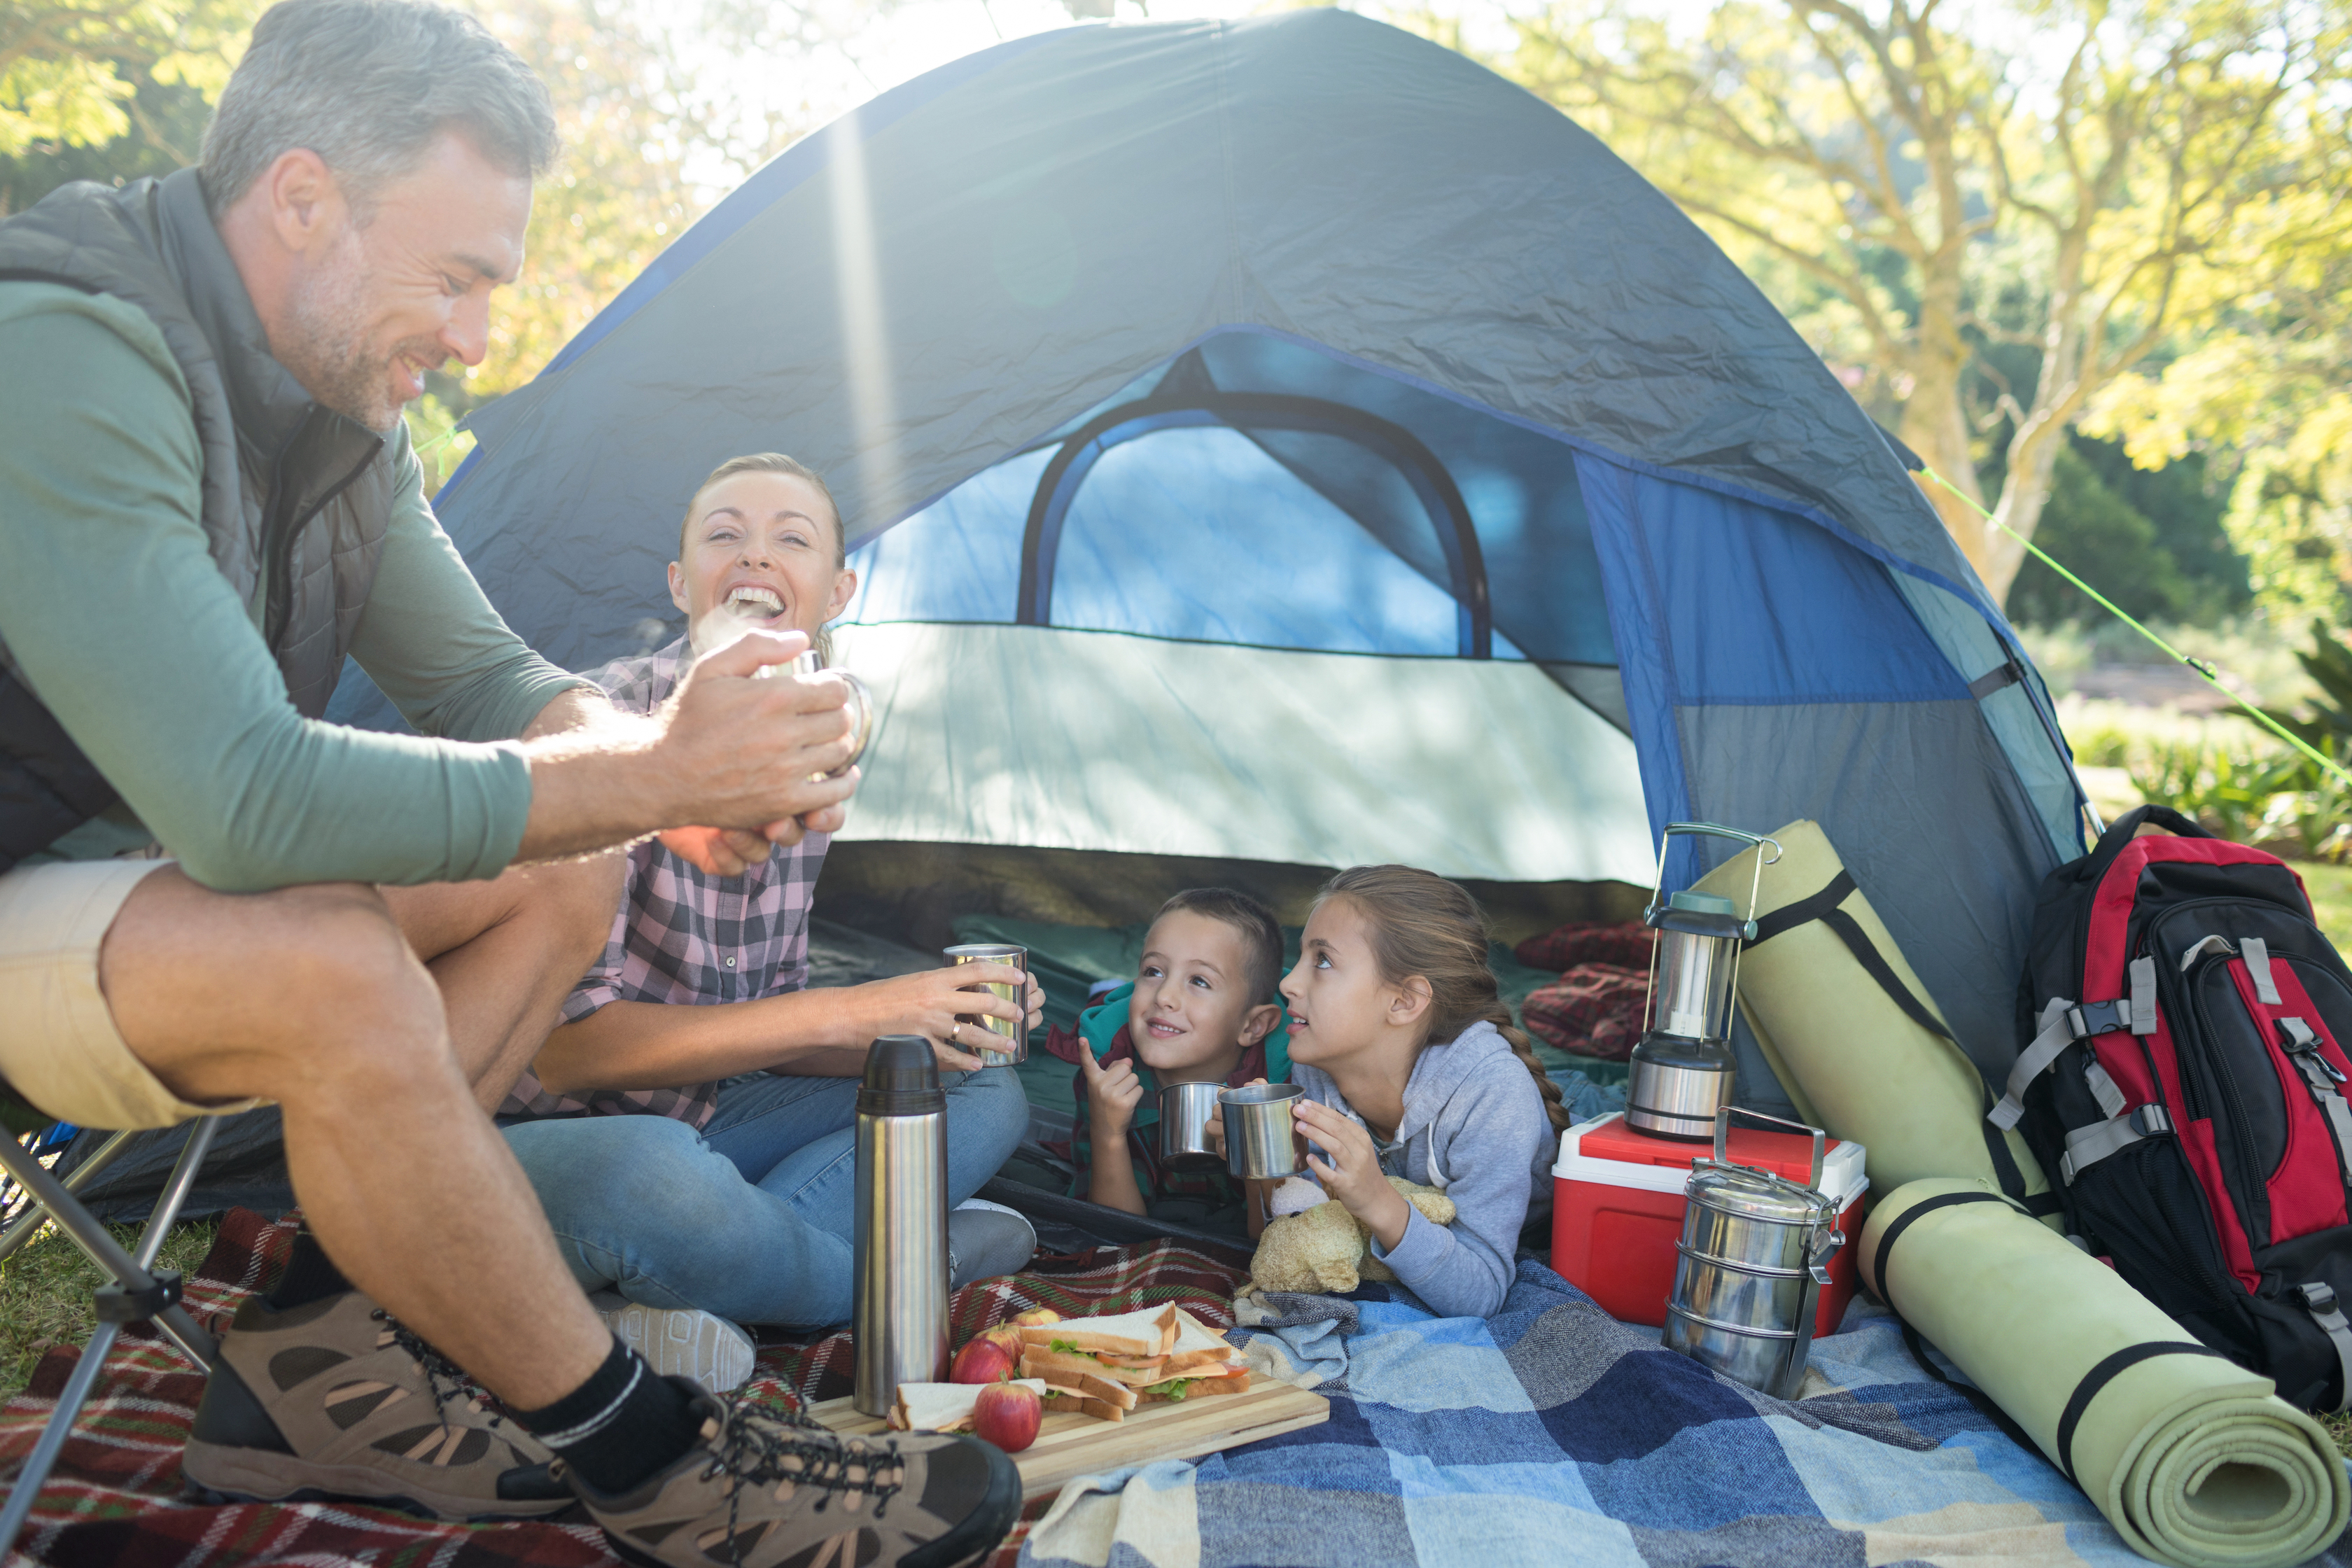 priority health personal wellness camping meals family eating together